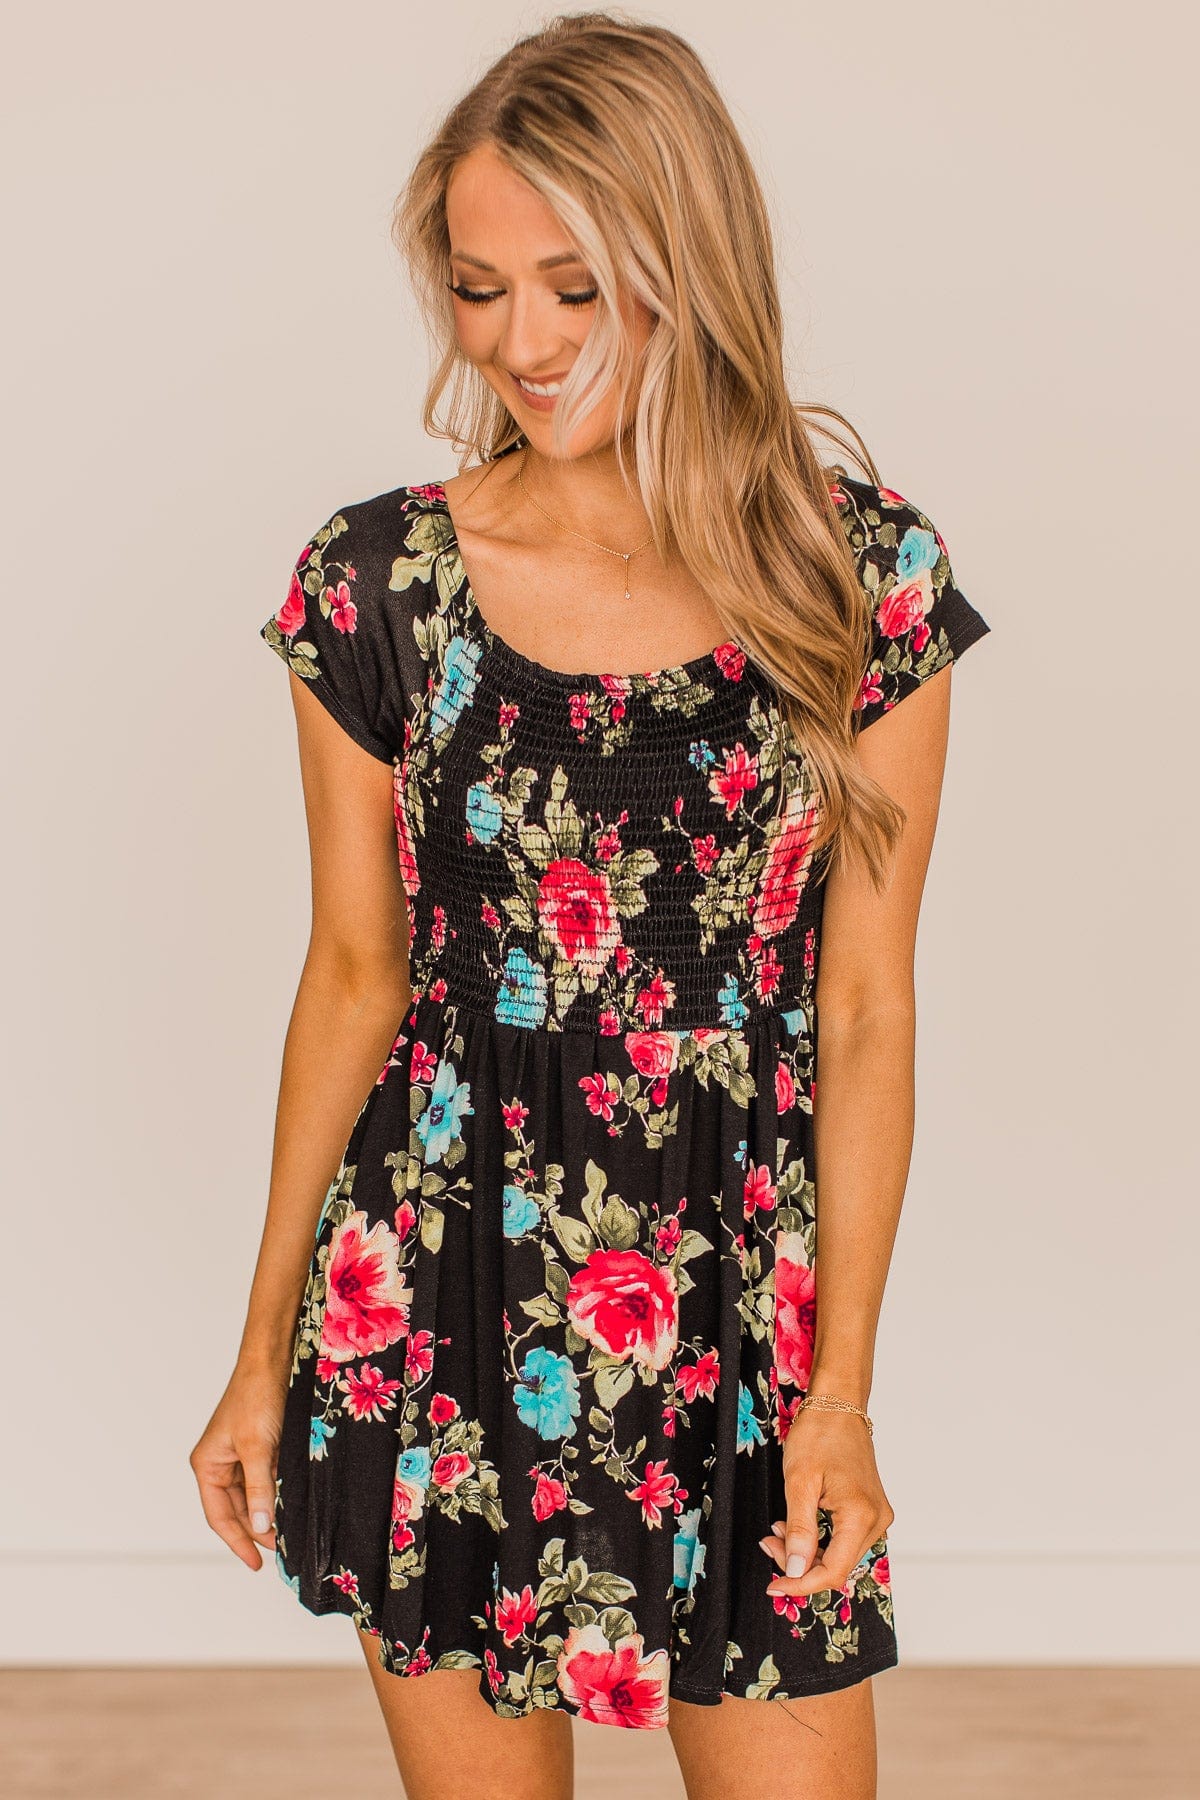 Fine Without You Smocked Floral Dress- Black – The Pulse Boutique